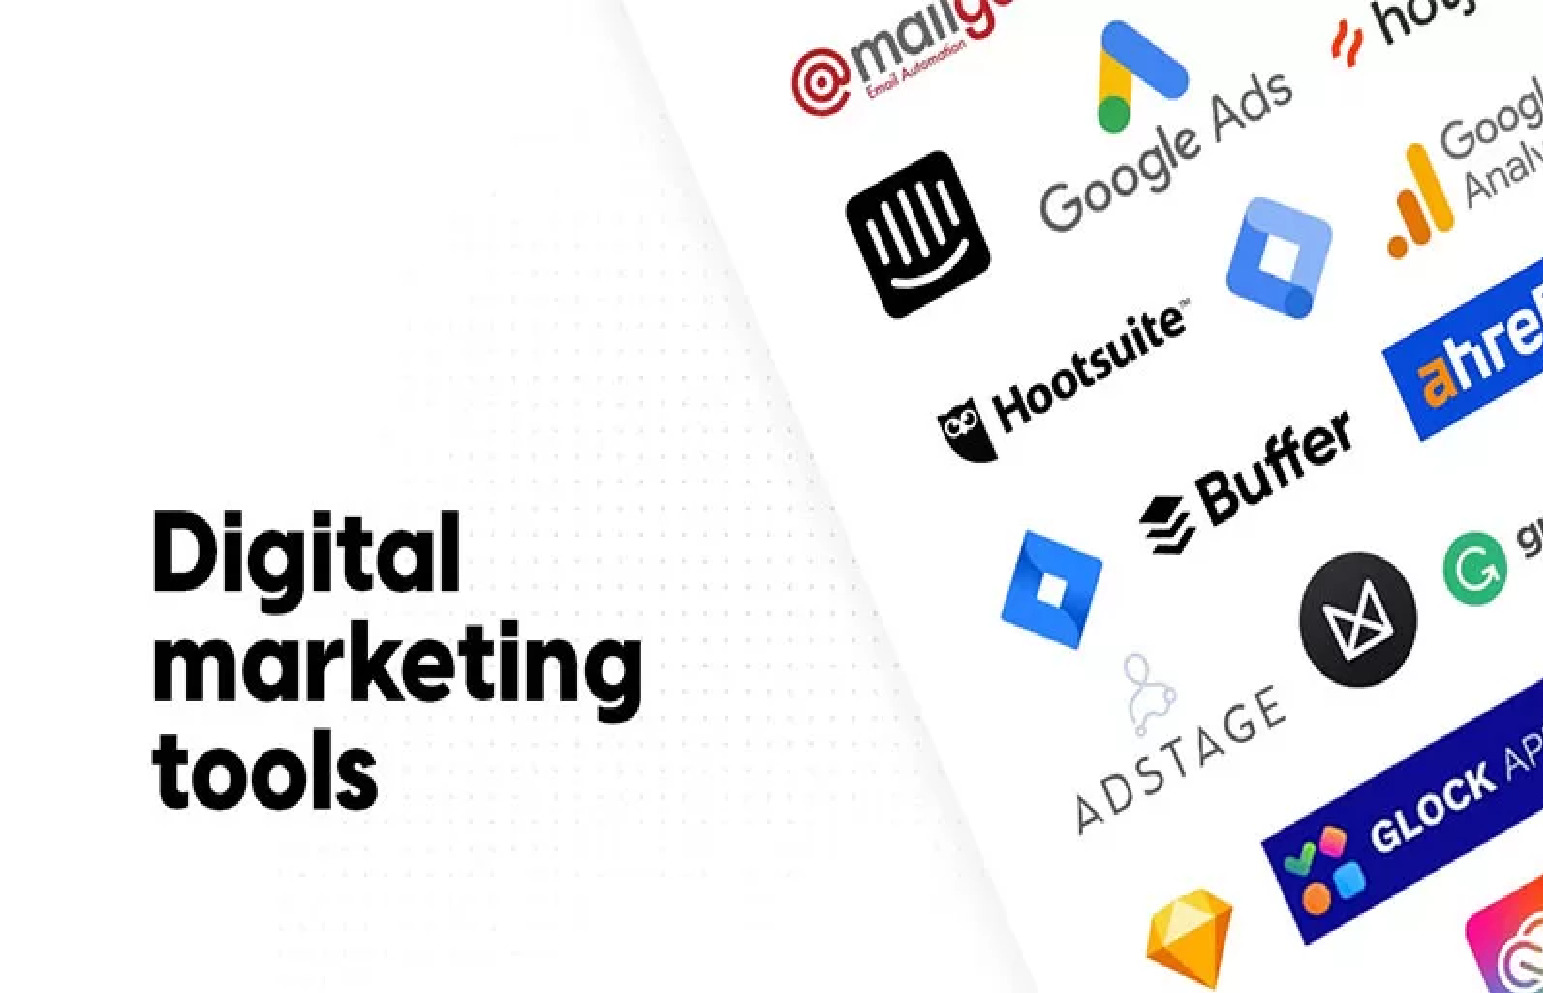 What are Marketing Tools? Top 5 Best Marketing Tools in 2024